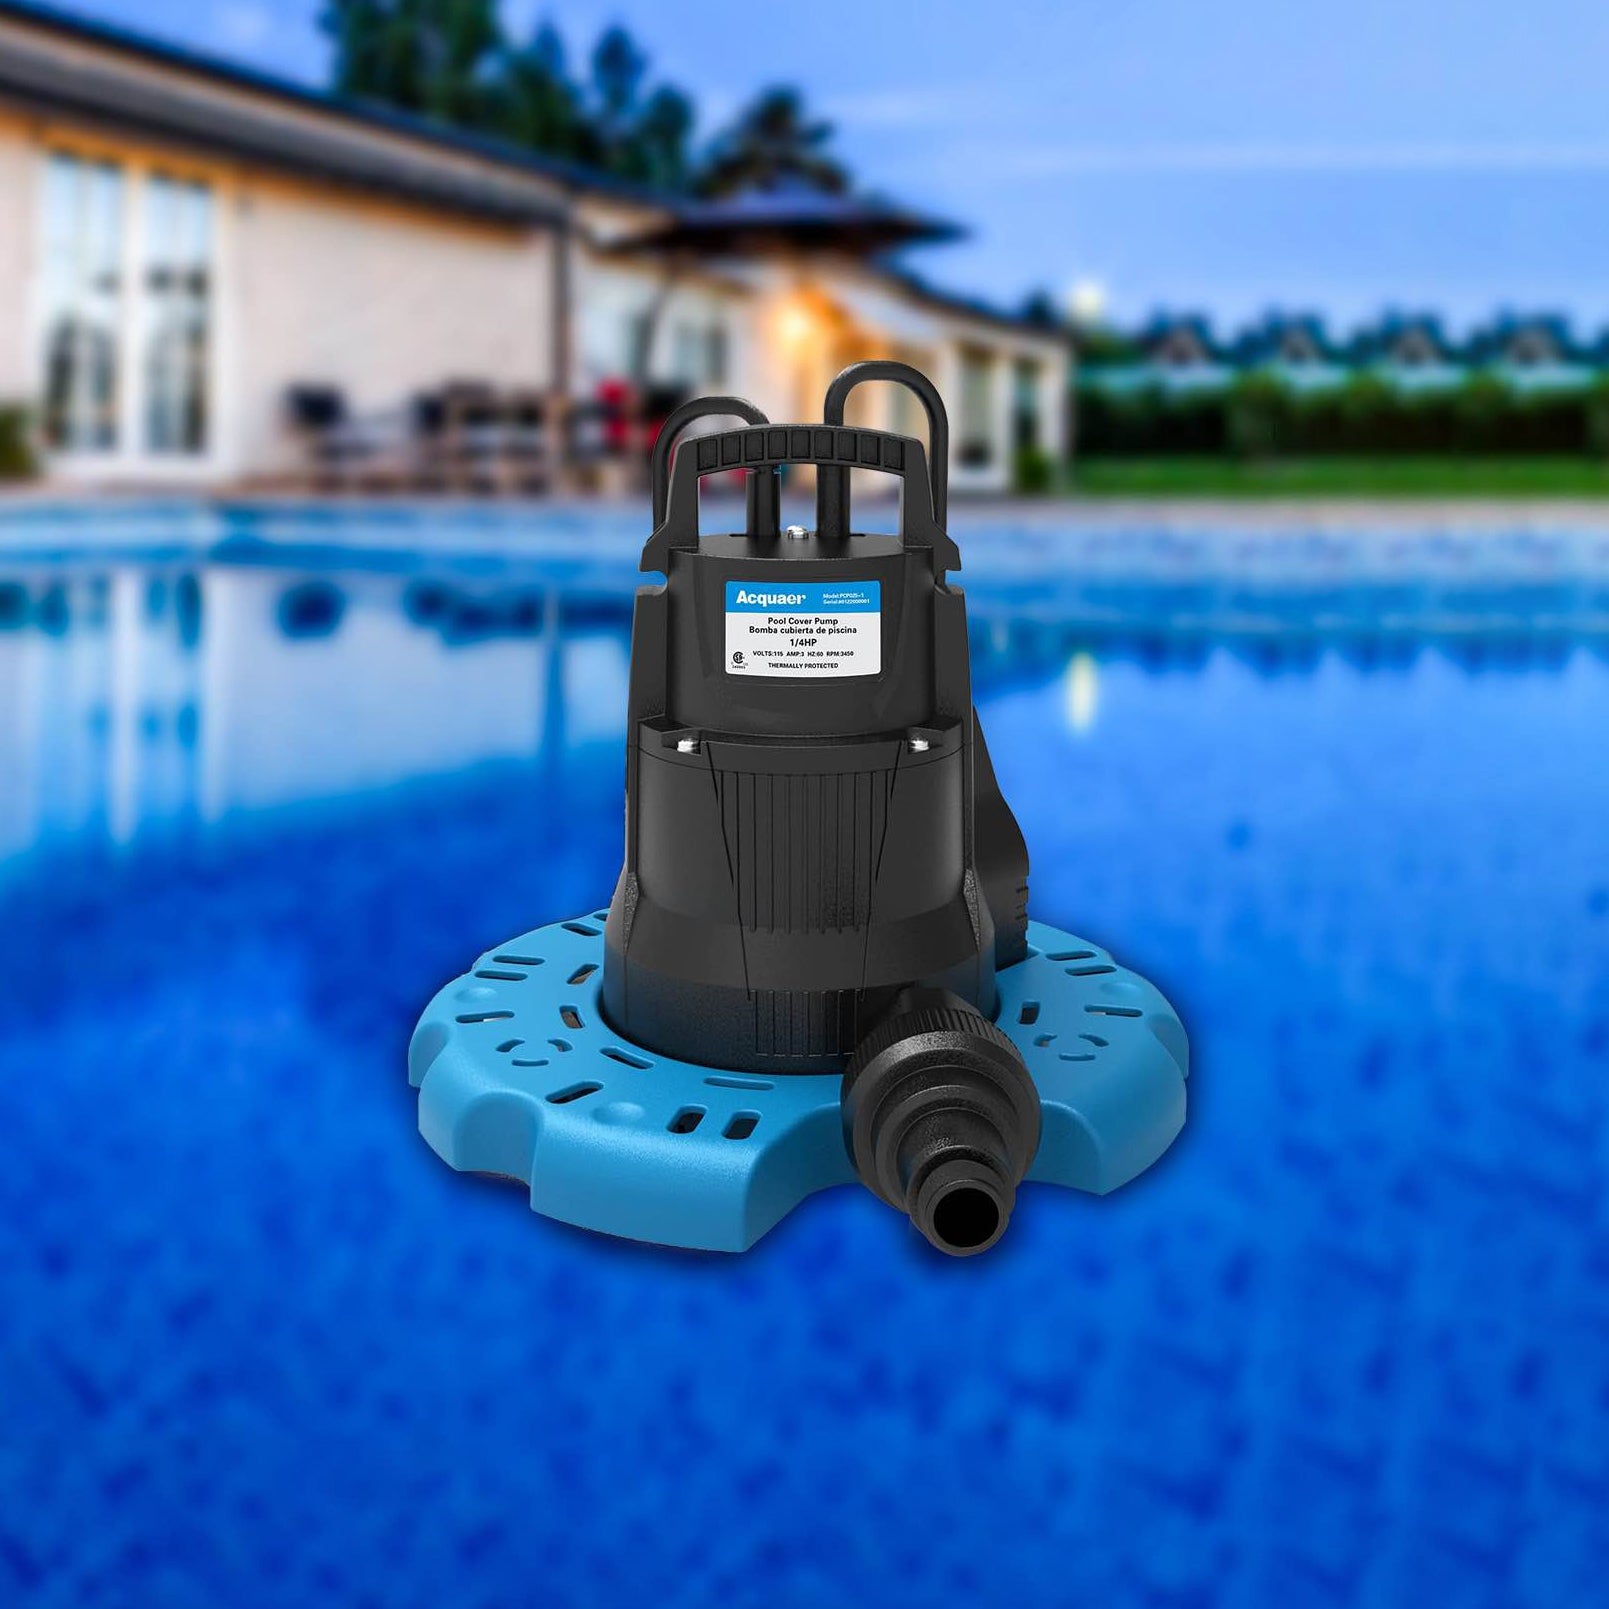 Acquaer 115-Volt, 1/4 HP, 2250 GPH, Automatic, Submersible, Swimming Pool Cover Pump with 25ft Power Cord